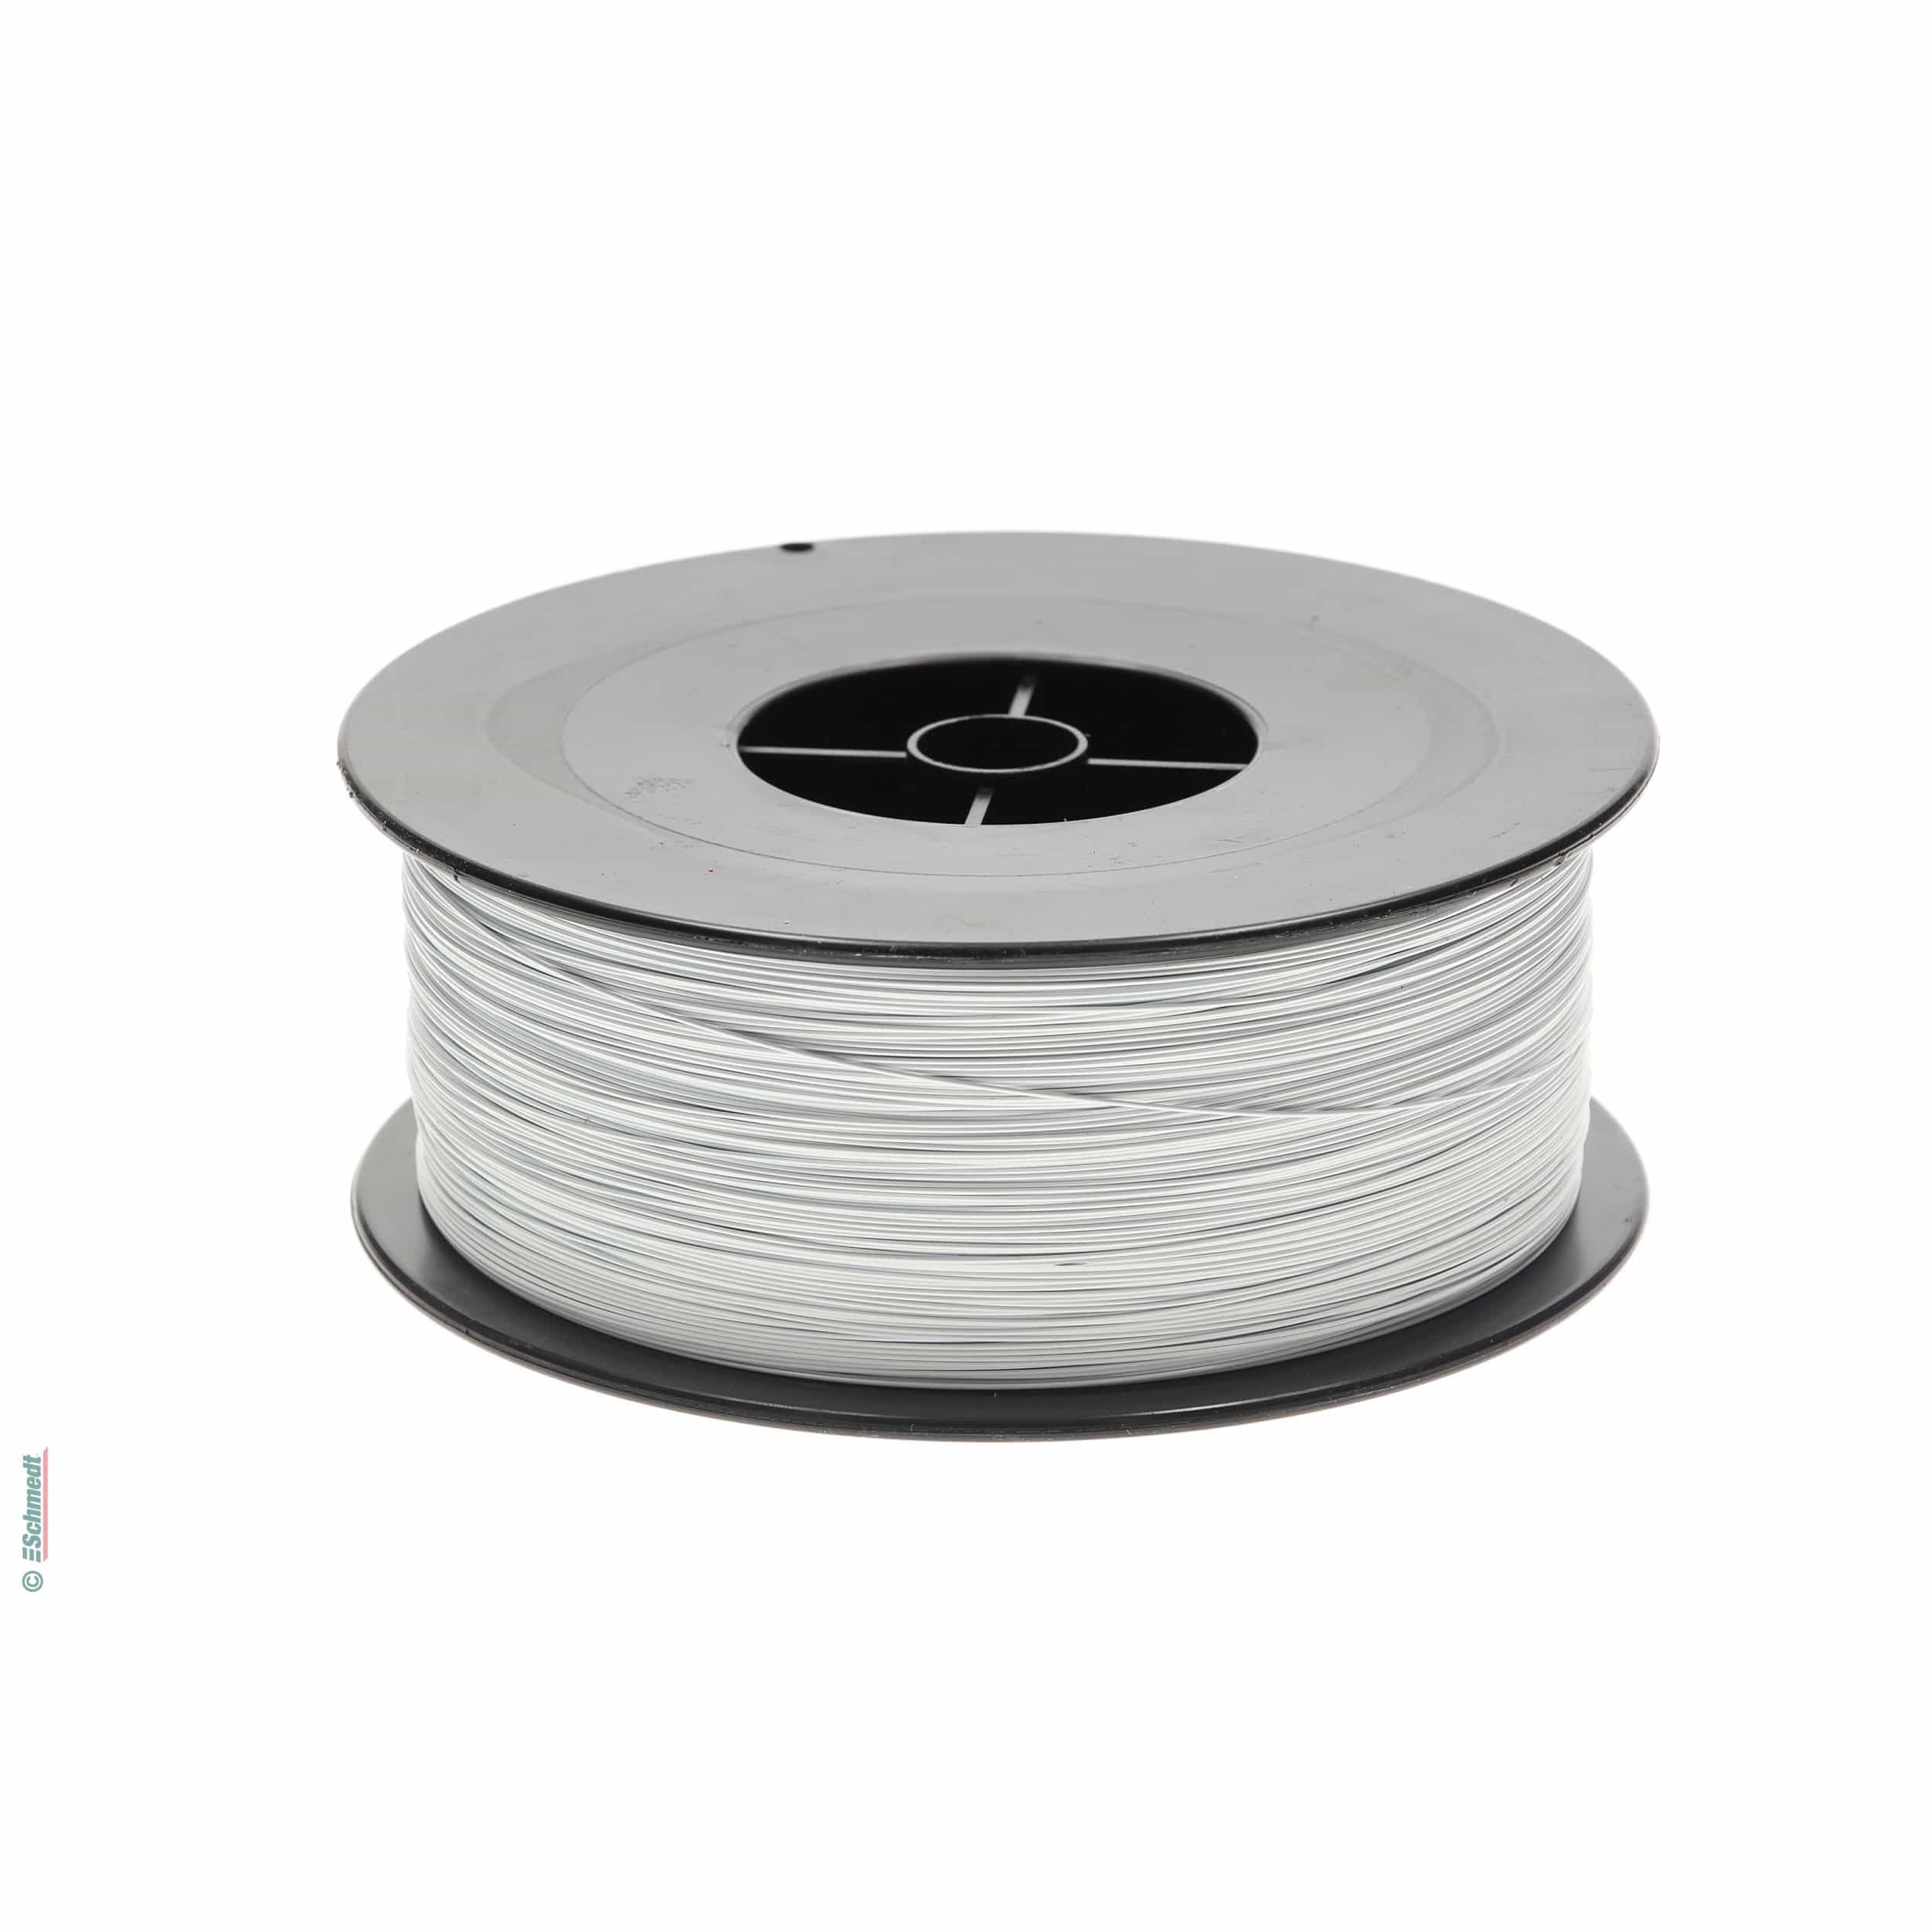 Stitching wire, round | nylon-coated iron - Colour white - for the production of stitched products on saddle stitchers...